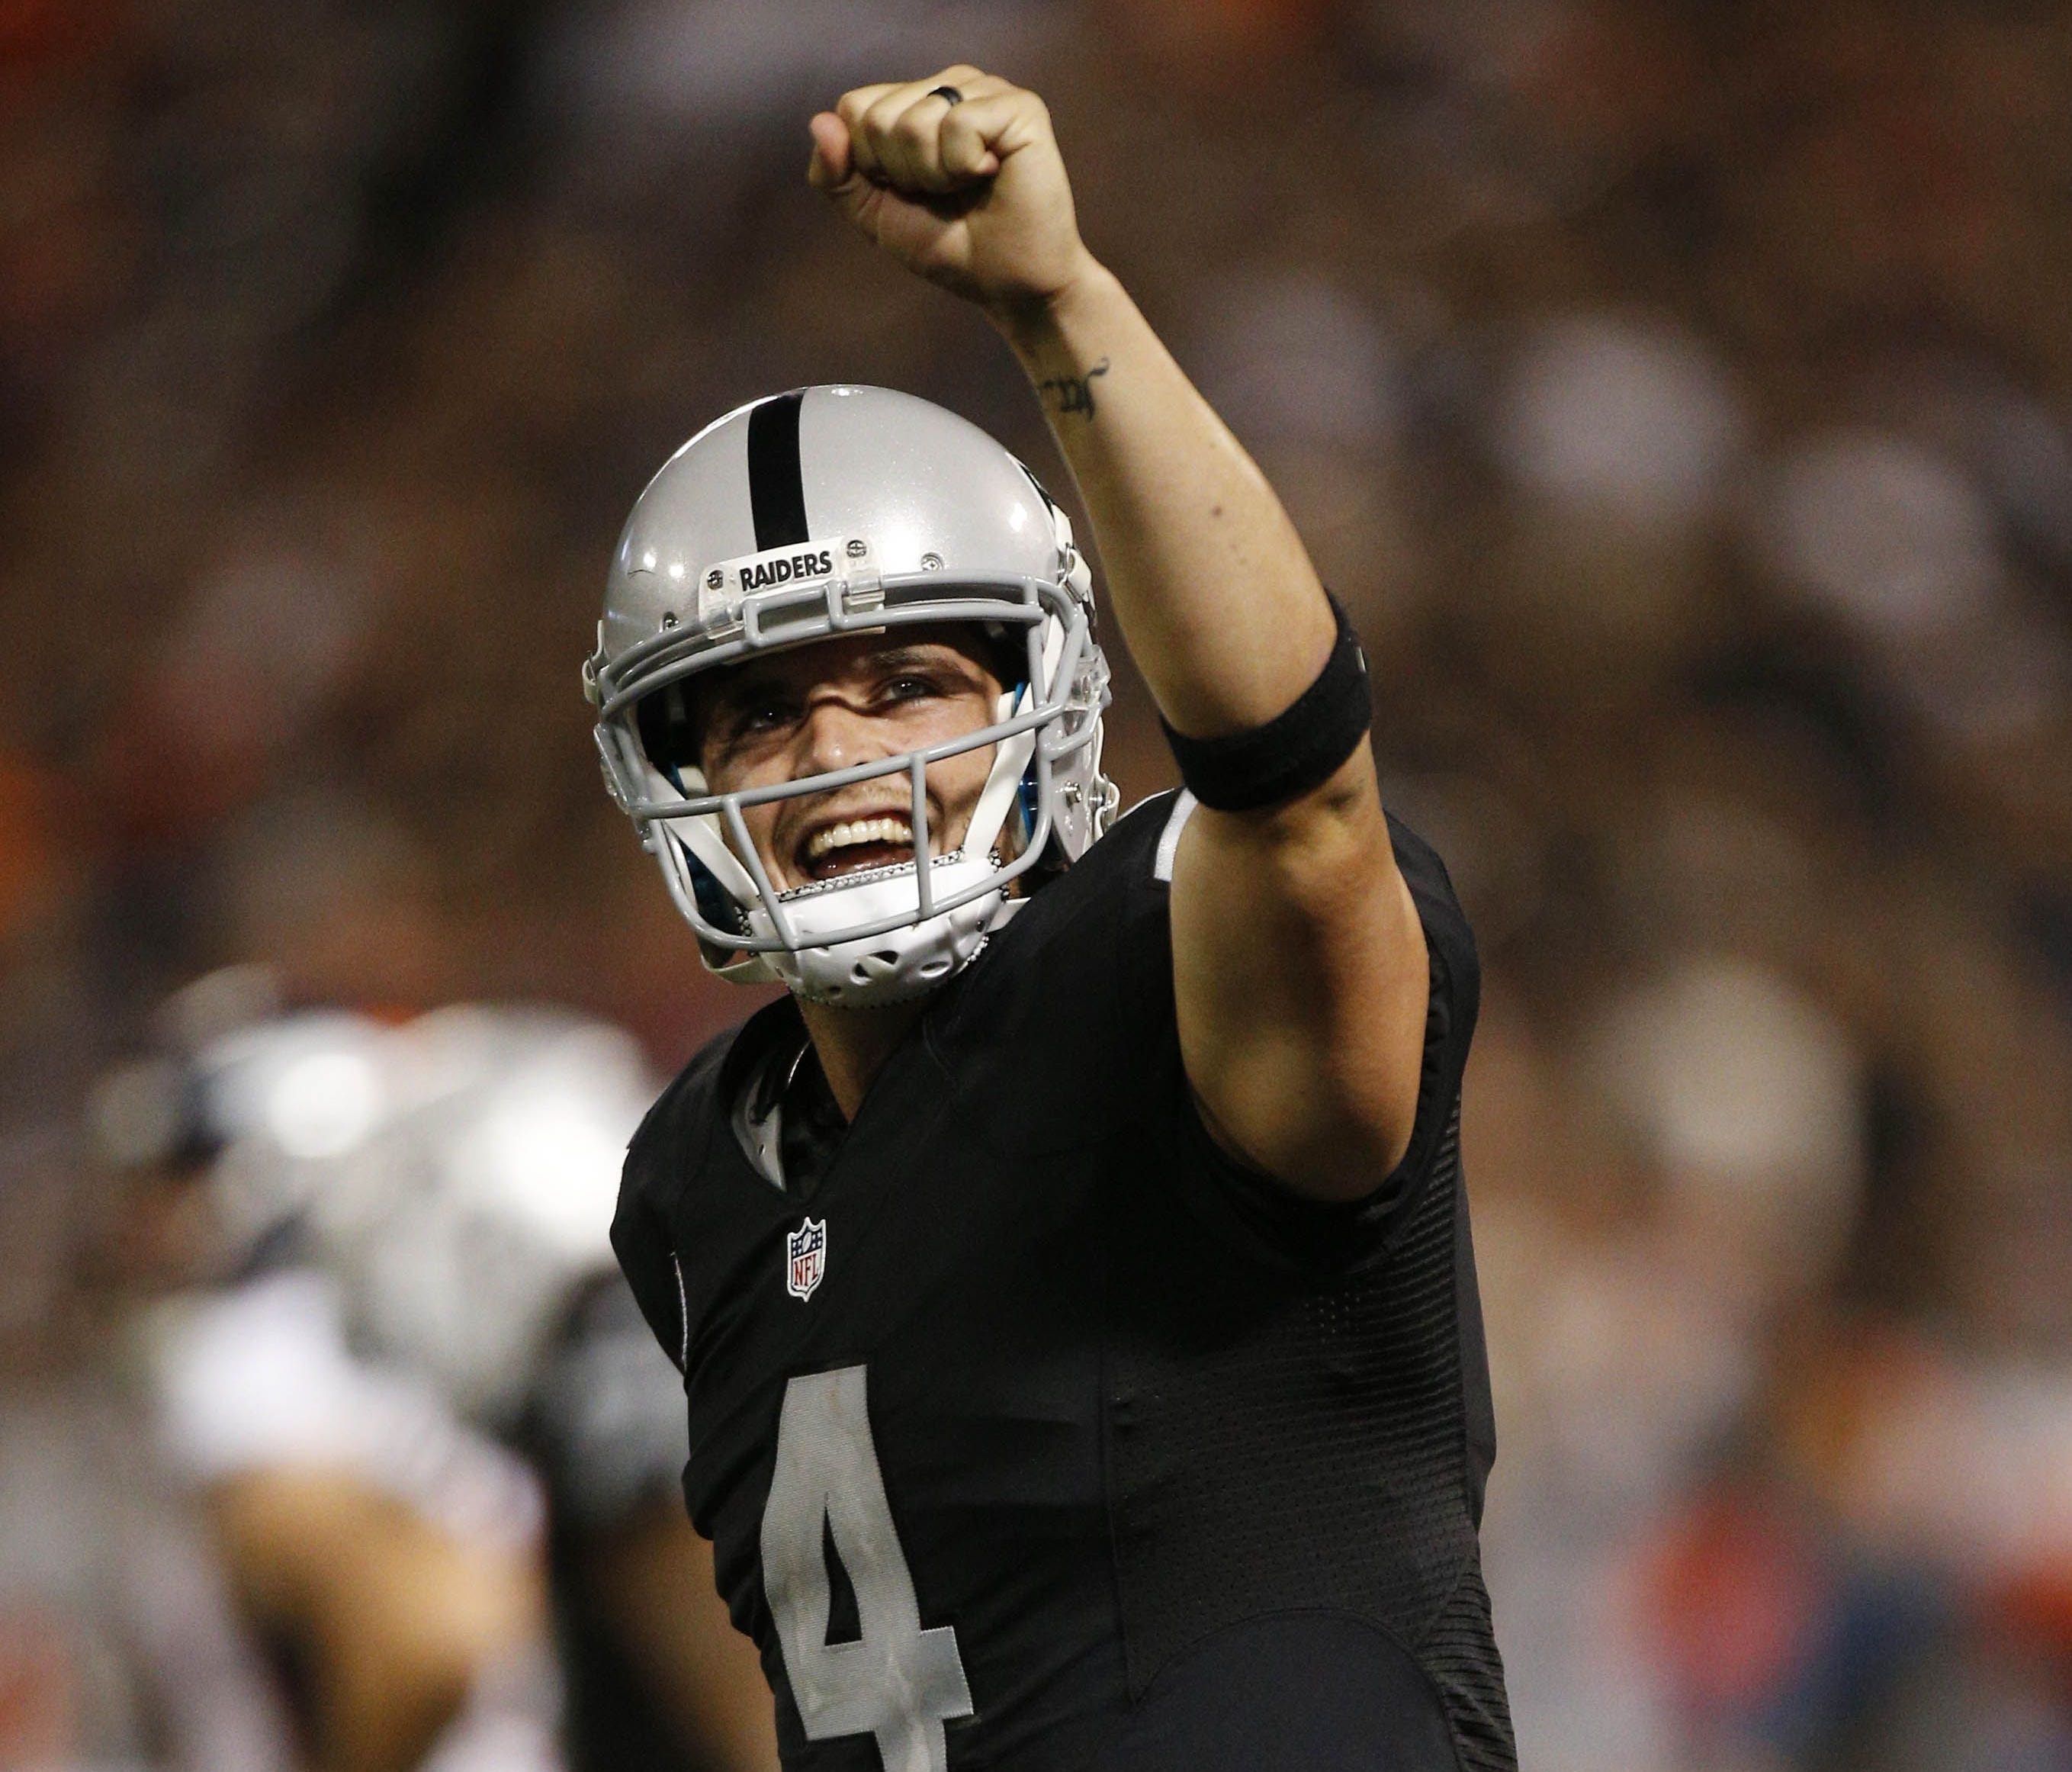 Oakland Raiders quarterback Derek Carr (4) reacts after the Raiders rushed for a touchdown against the Denver Broncos in the fourth quarter at Oakland Coliseum.